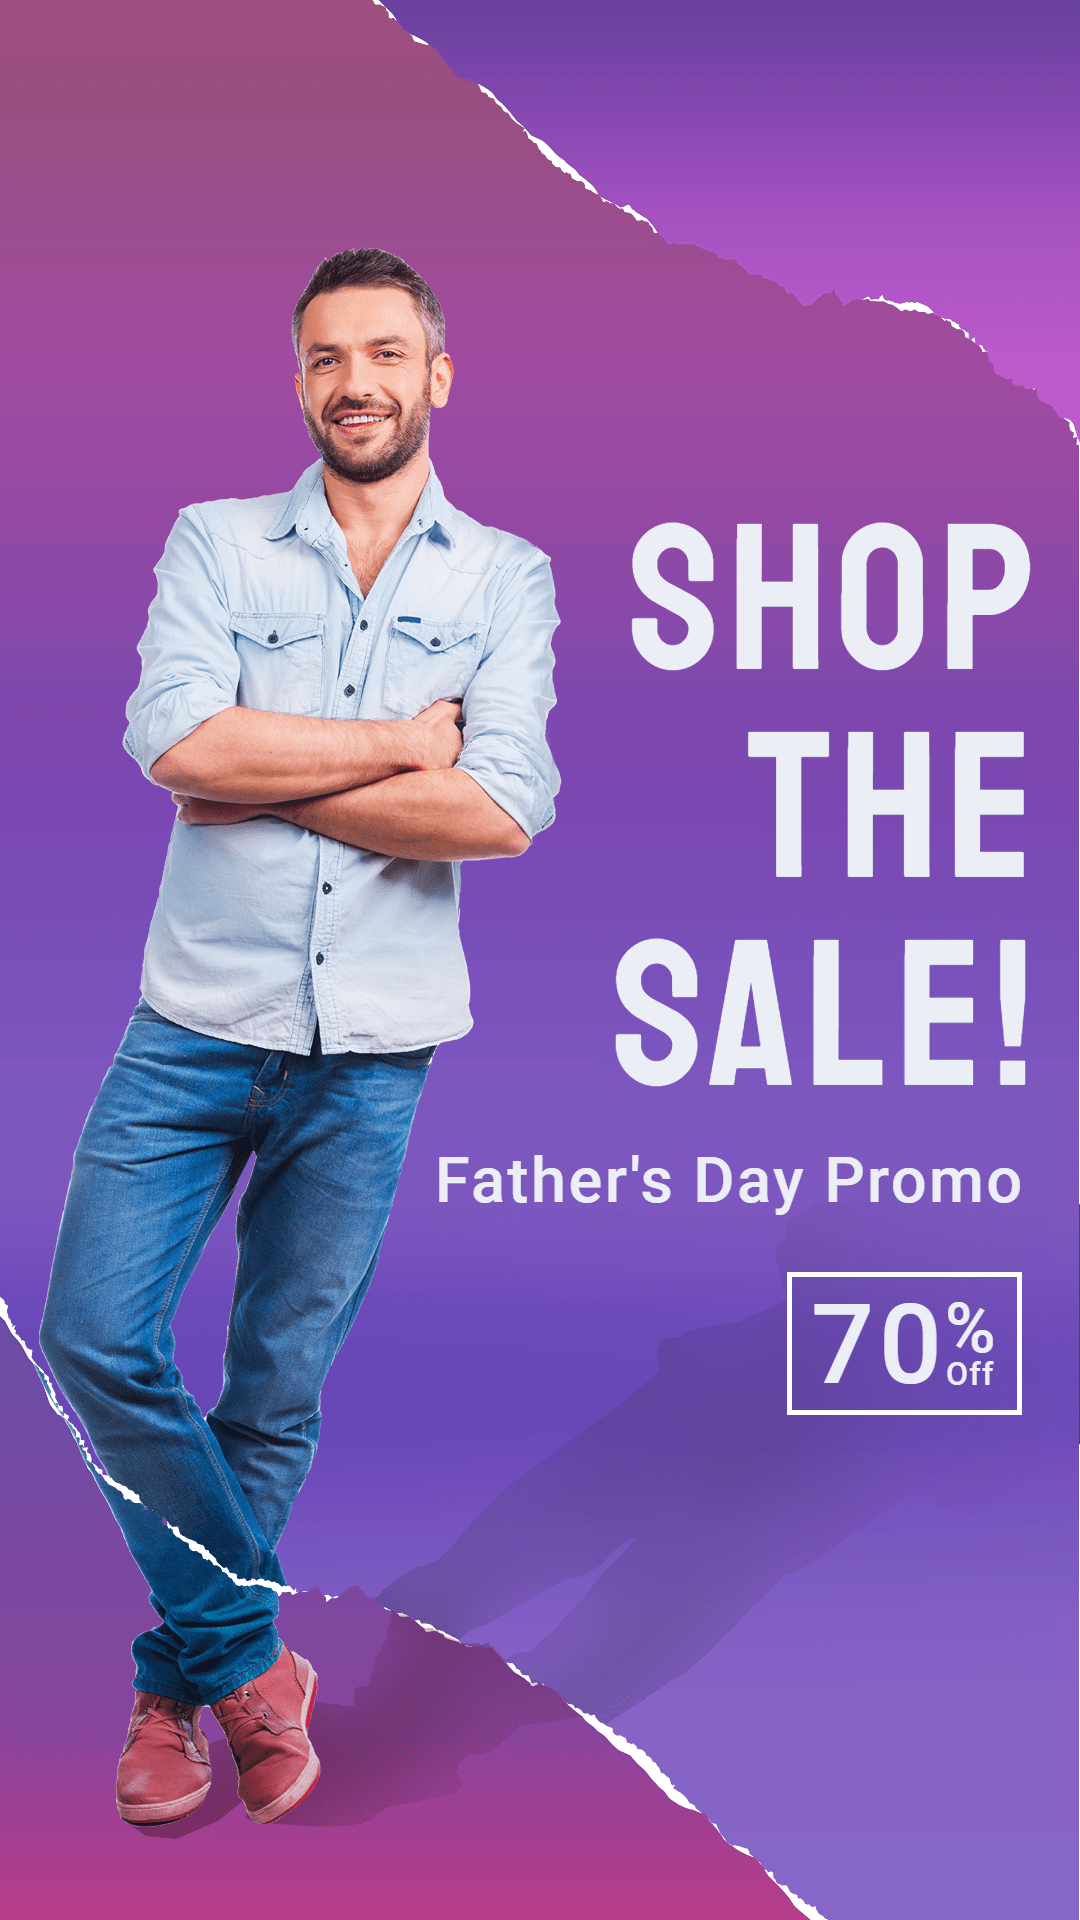 Paper Tear Father's Day Men's Clothing Fashion Discount Sale Promo Ecommerce Story预览效果